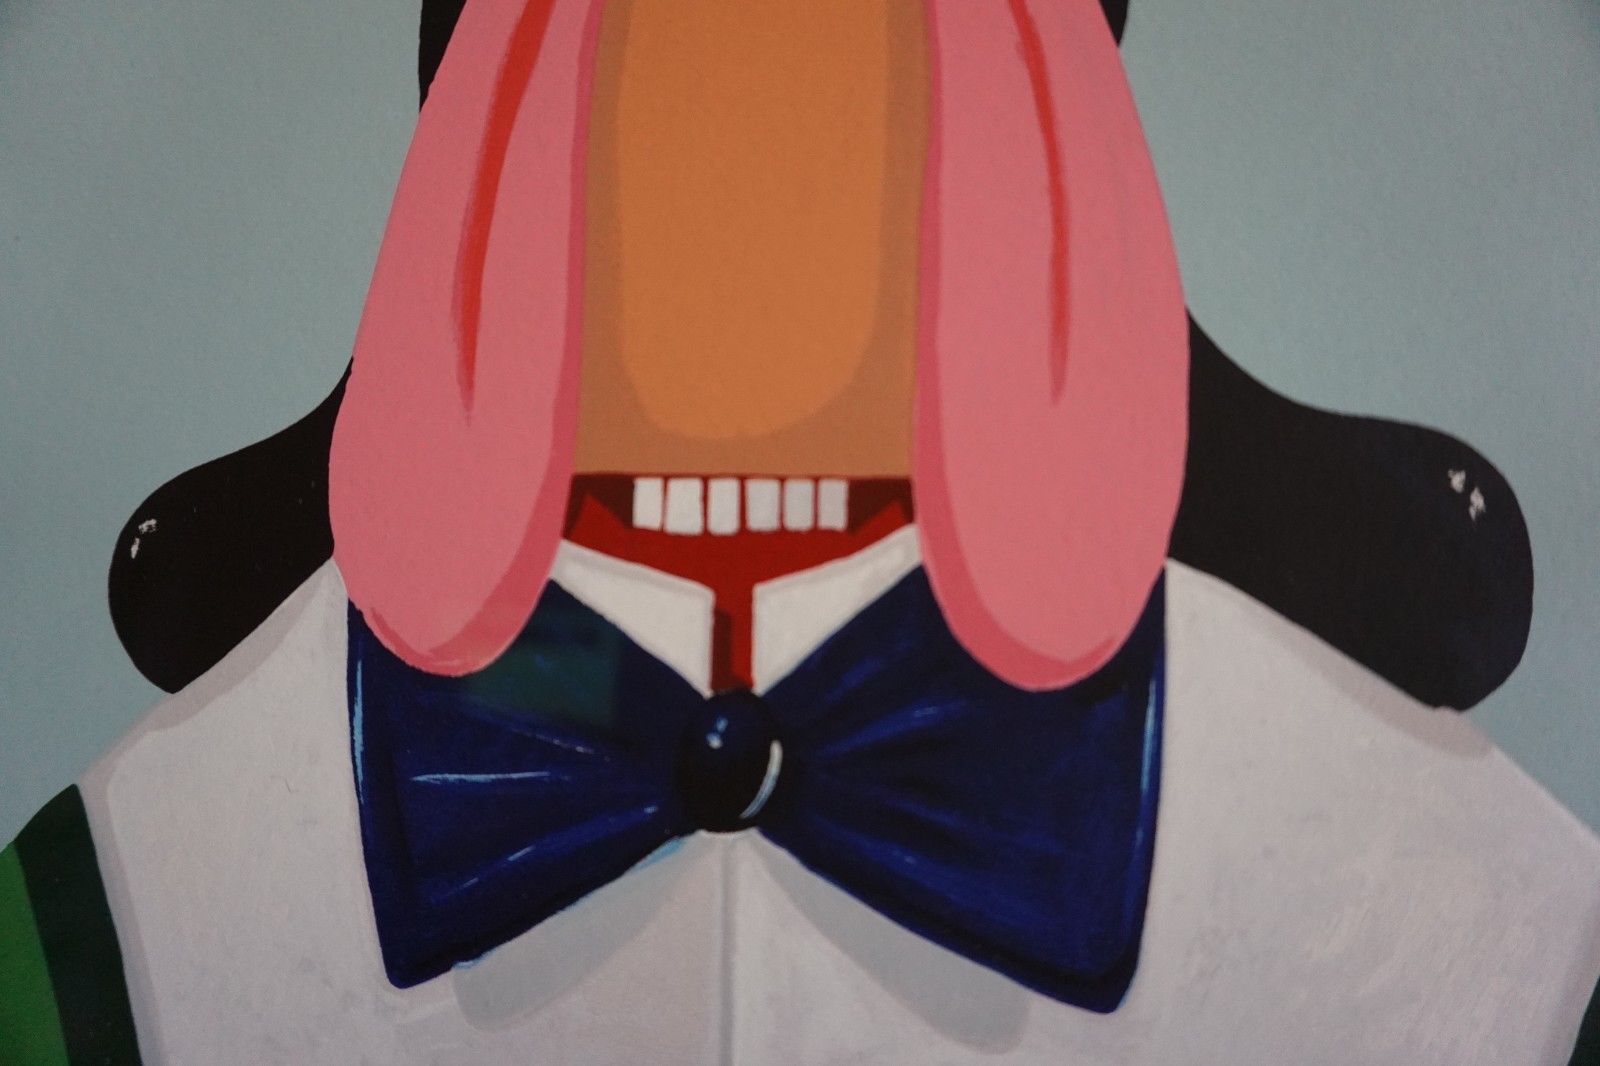 George Condo - Droopy Dog Abstraction Print